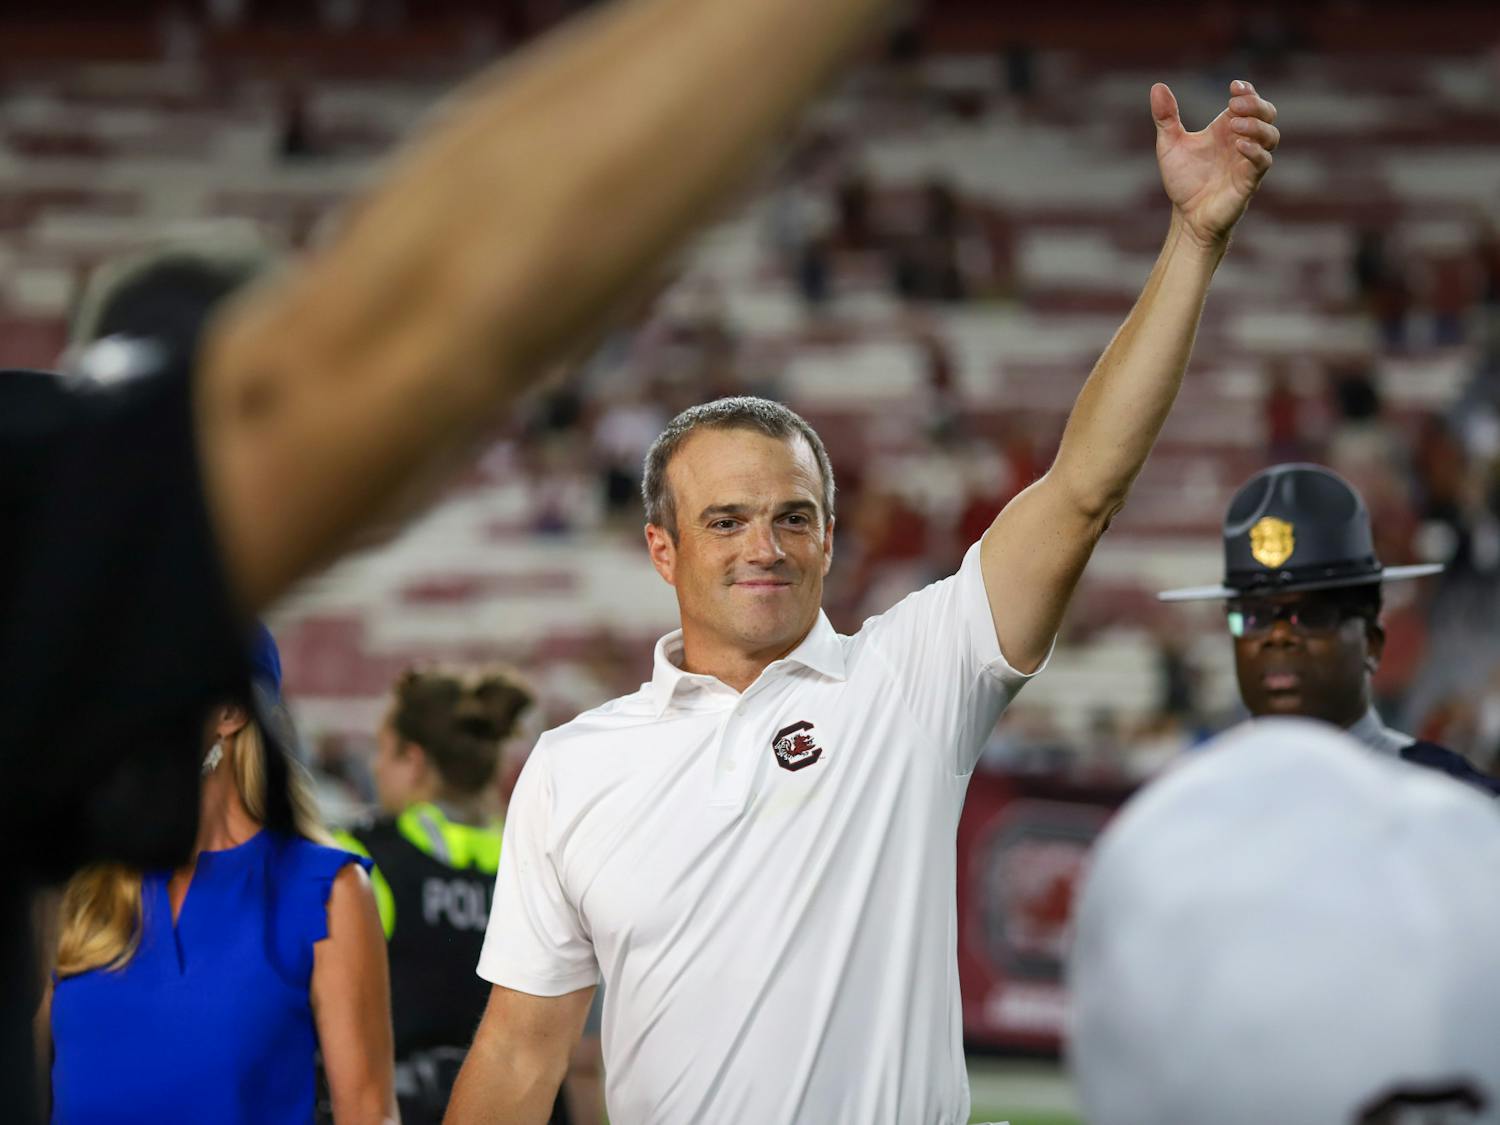 Head football coach Shane Beamer holds up his hand during the alma mater after South Carolina defeated Furman 47-21 in its first home game of the 2023 season. Beamer is now 16-12 in just over two seasons as the Gamecocks' coach.